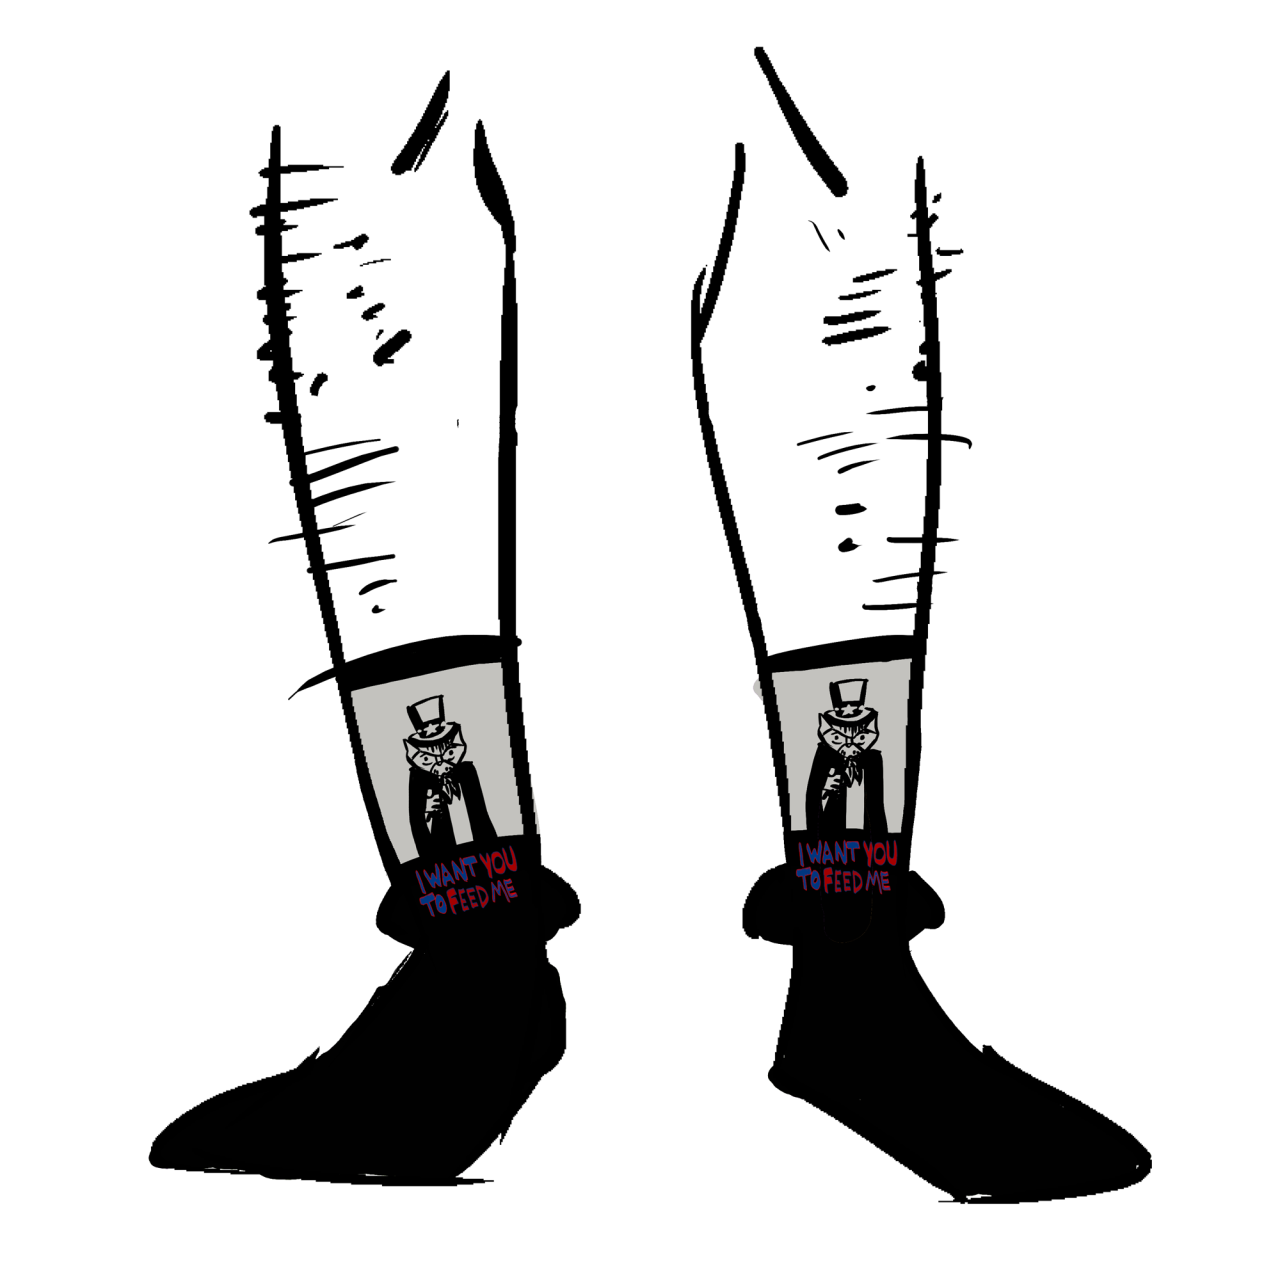 Black socks with a cat dressed as Uncle Sam. The text says "I want you to feed me."